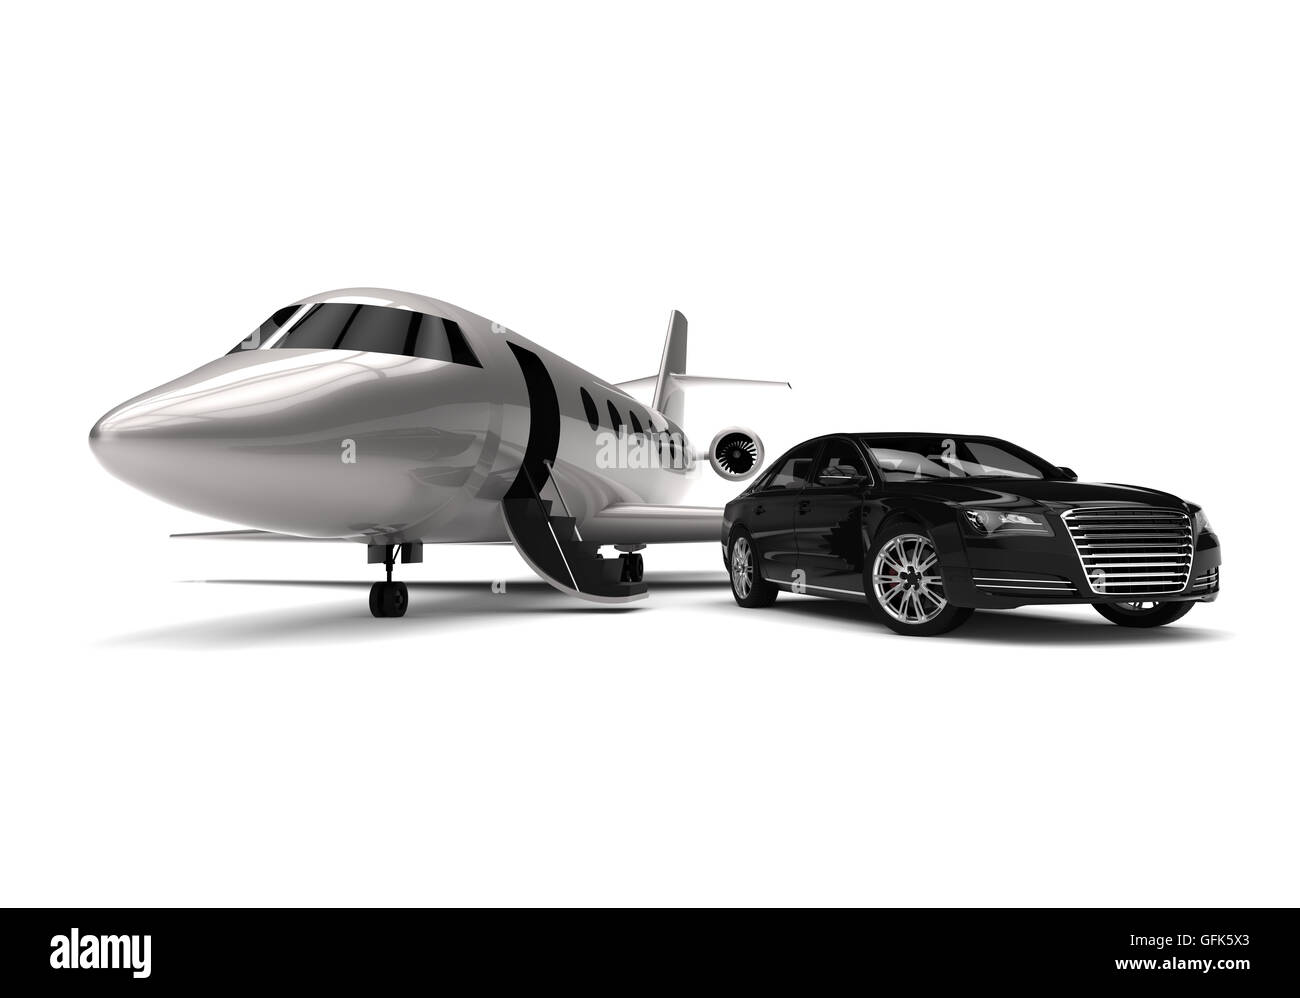 3D render image of a black limousine and a private jet representing expensive lifestyle Stock Photo